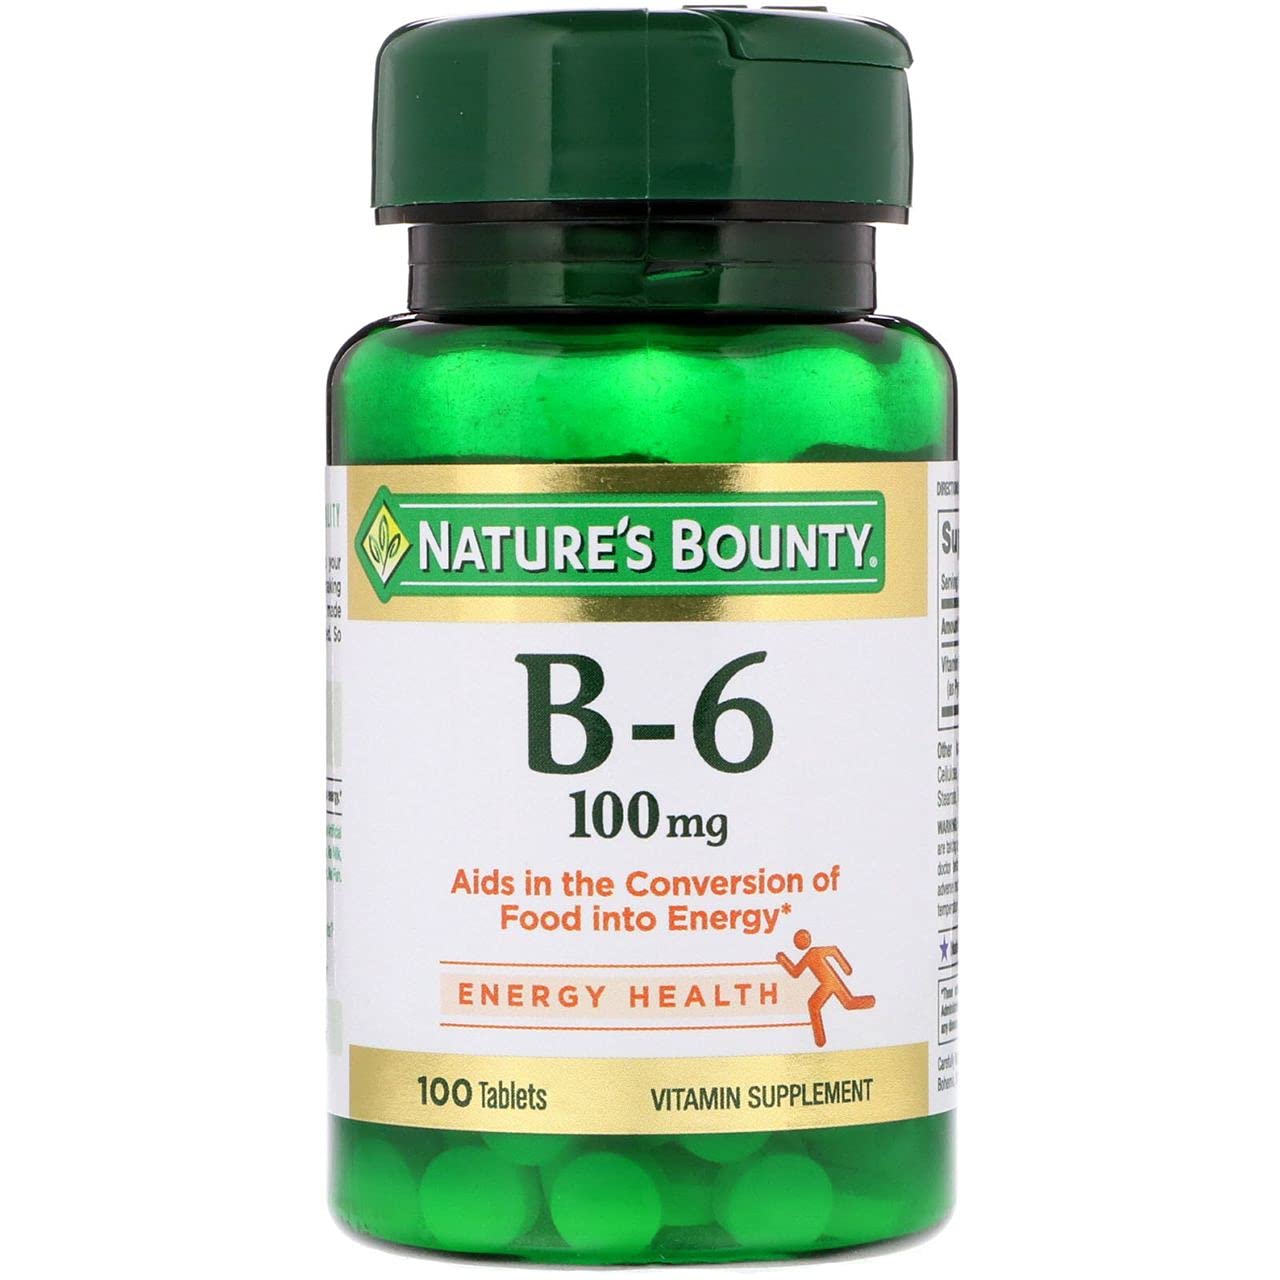 Nature’s Bounty B-6 100mg Tablets